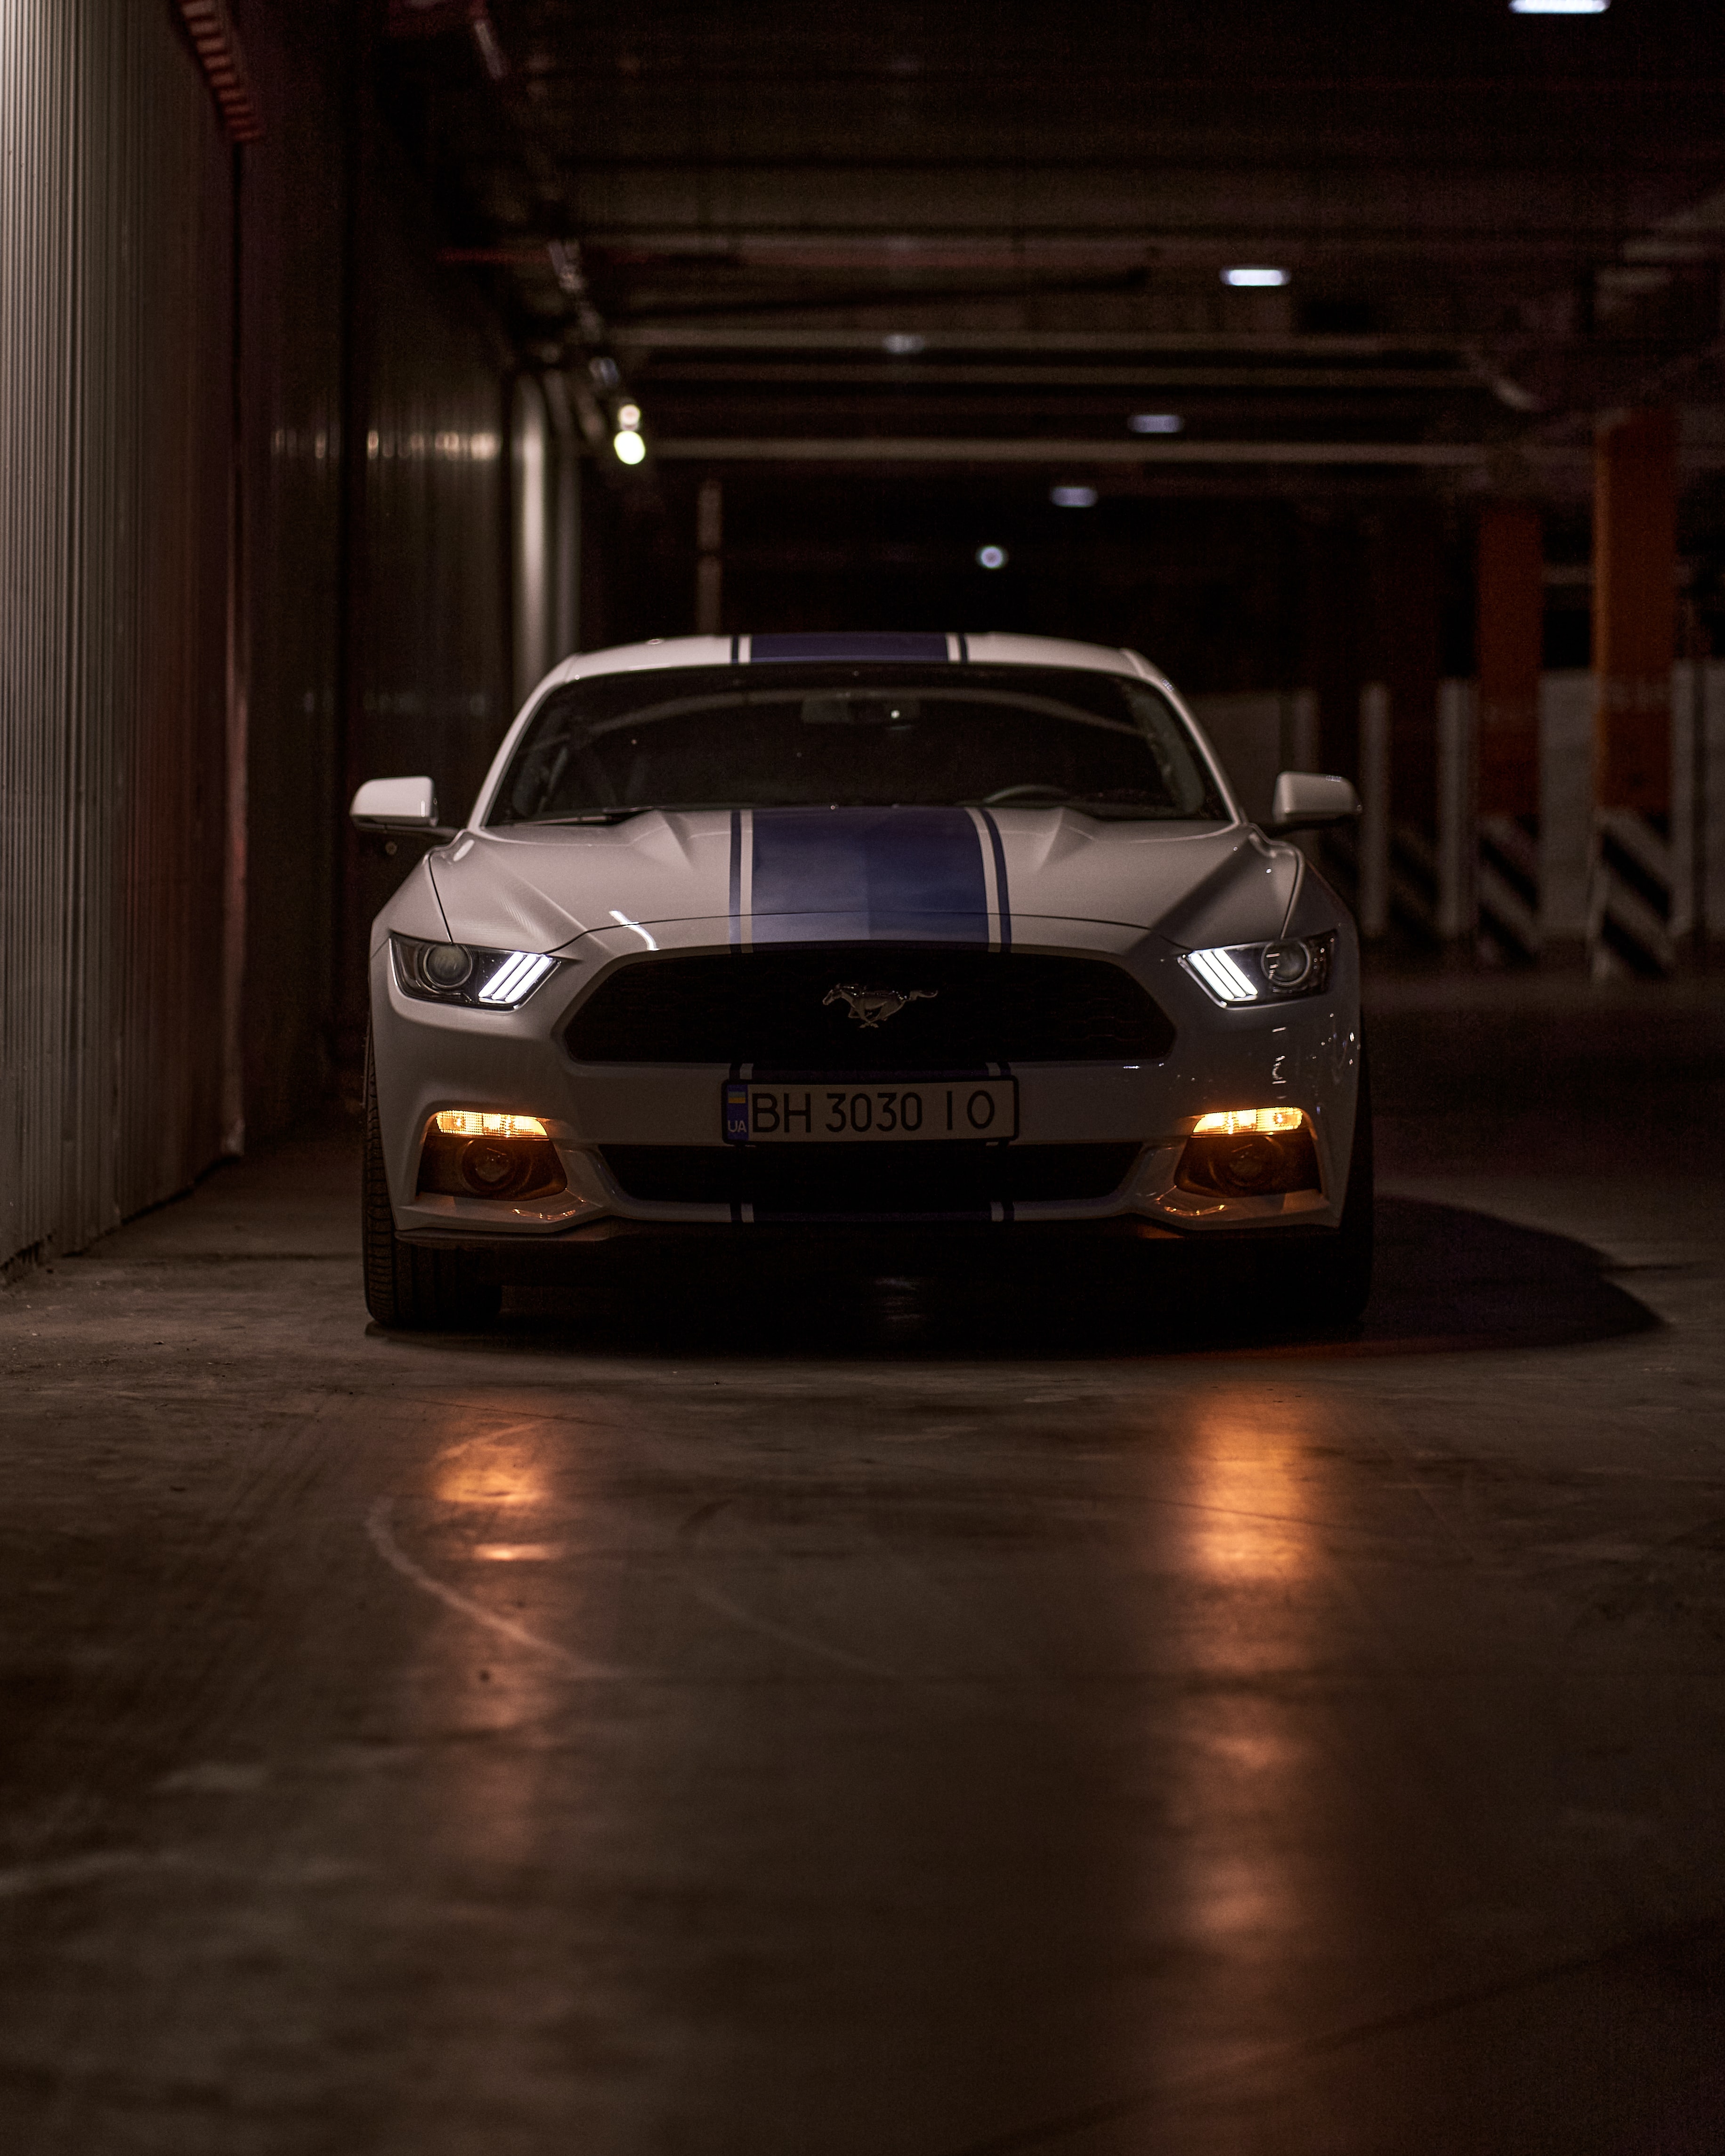 mustang, cars, front view, car, sports car, mustang gt, lights, headlights, sports